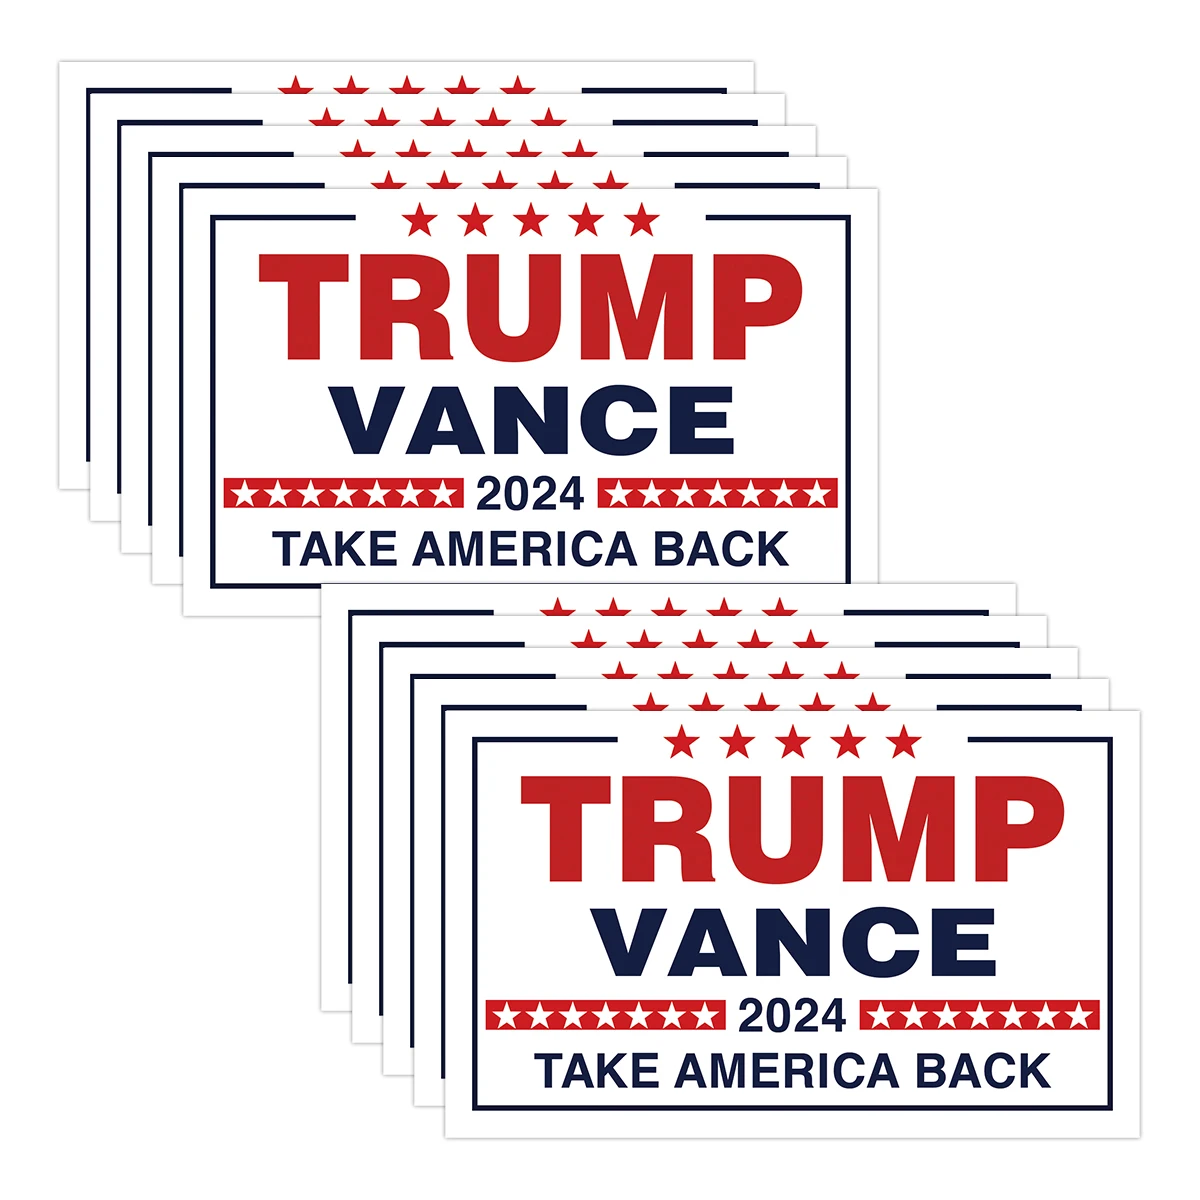 Trump Vance 2024 Stickers Presidential Election Bumper Sticker Make America Great Again Car Decals 10 sheets Waterproof Stickers